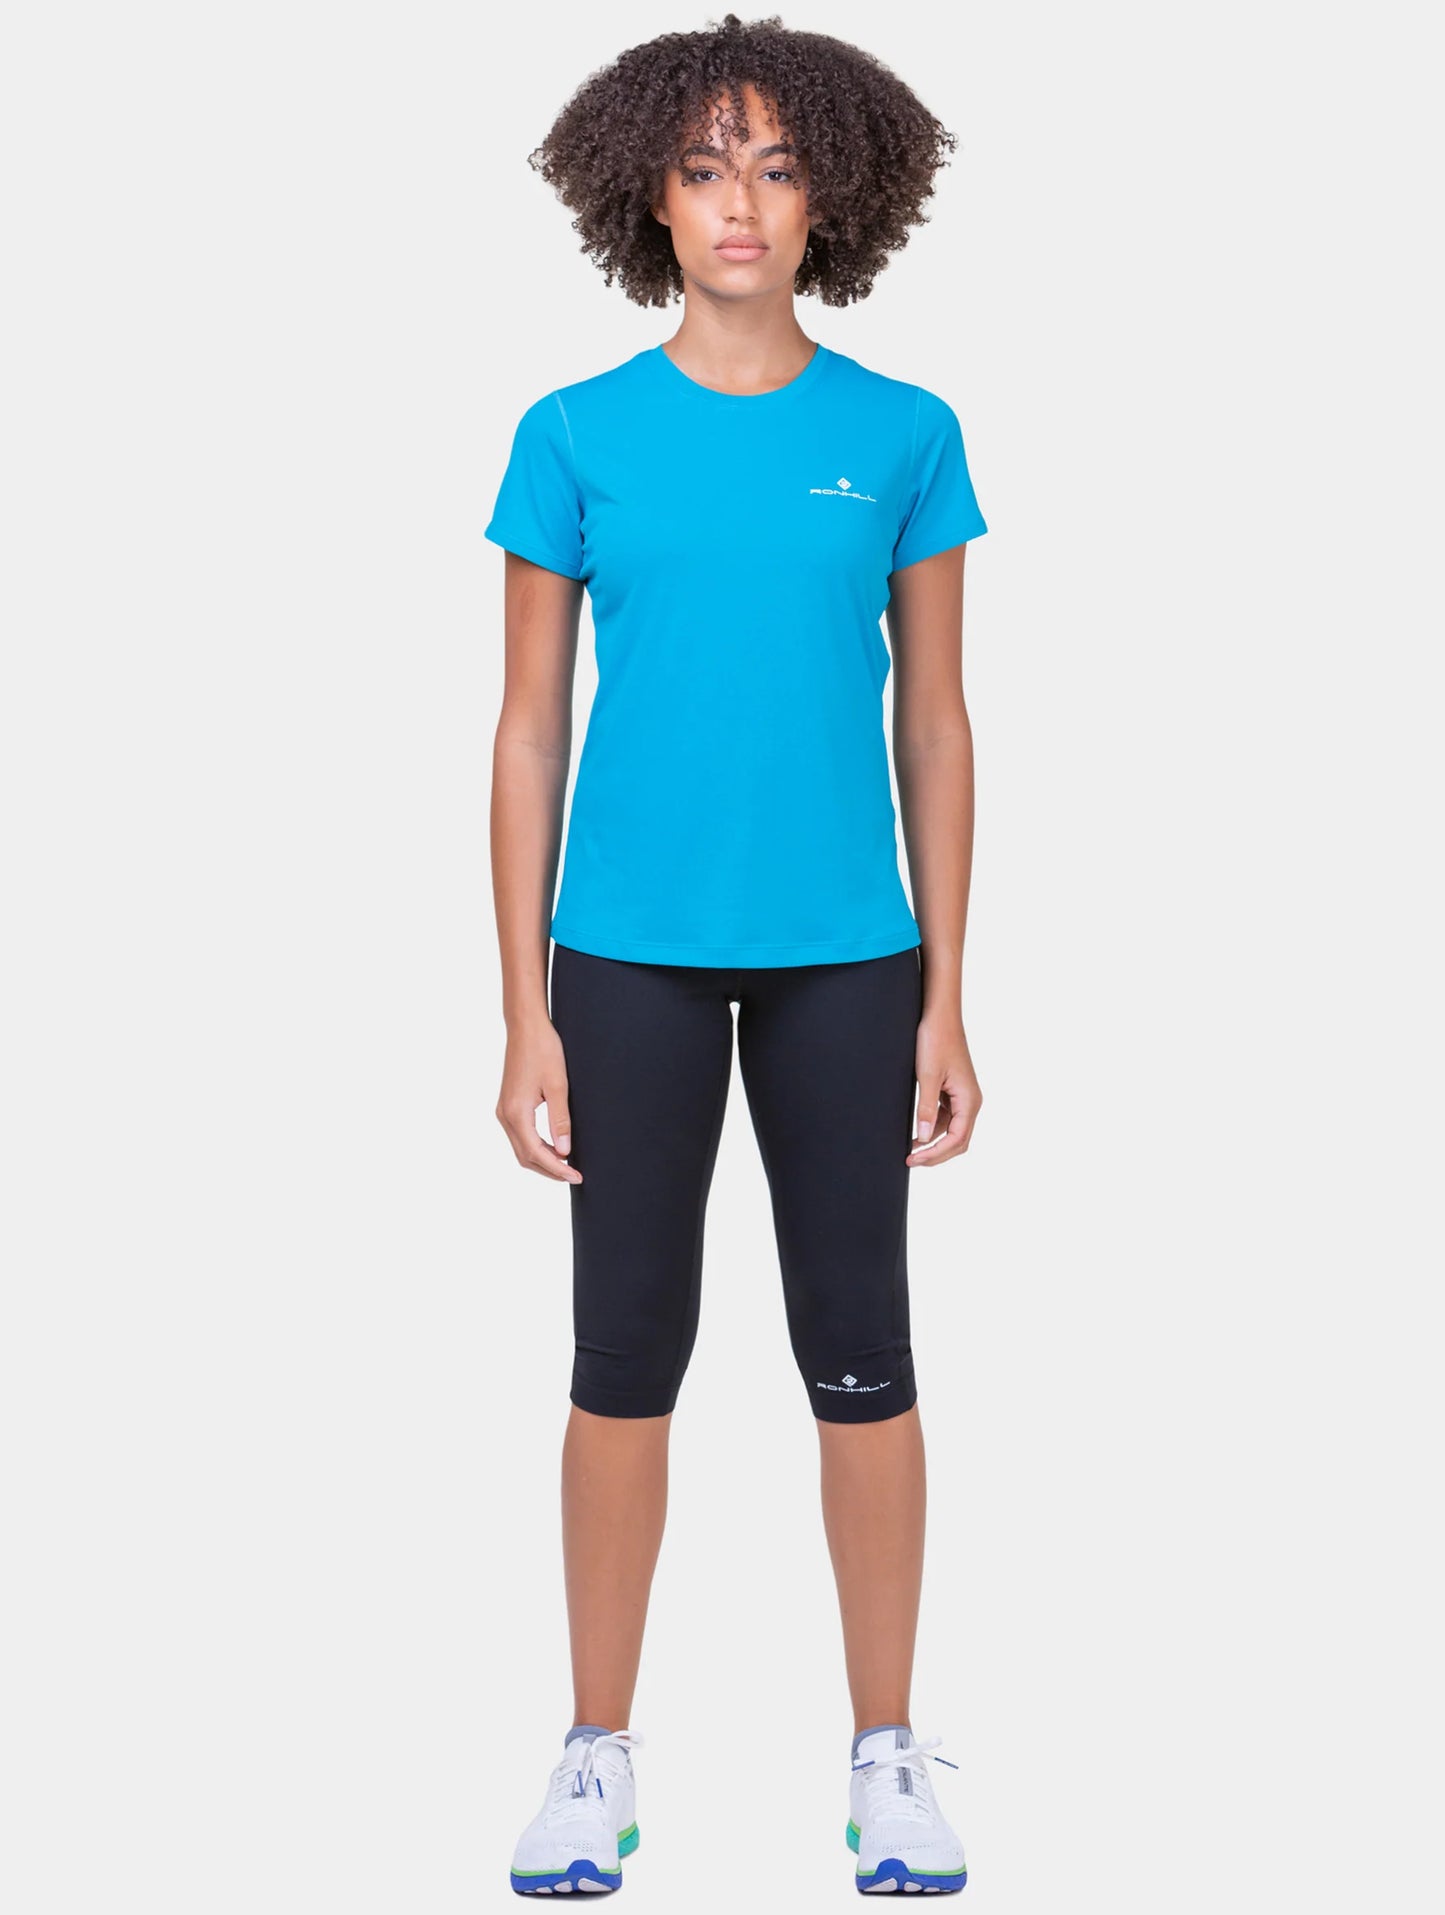 Ronhill Core SS Tee | Womens